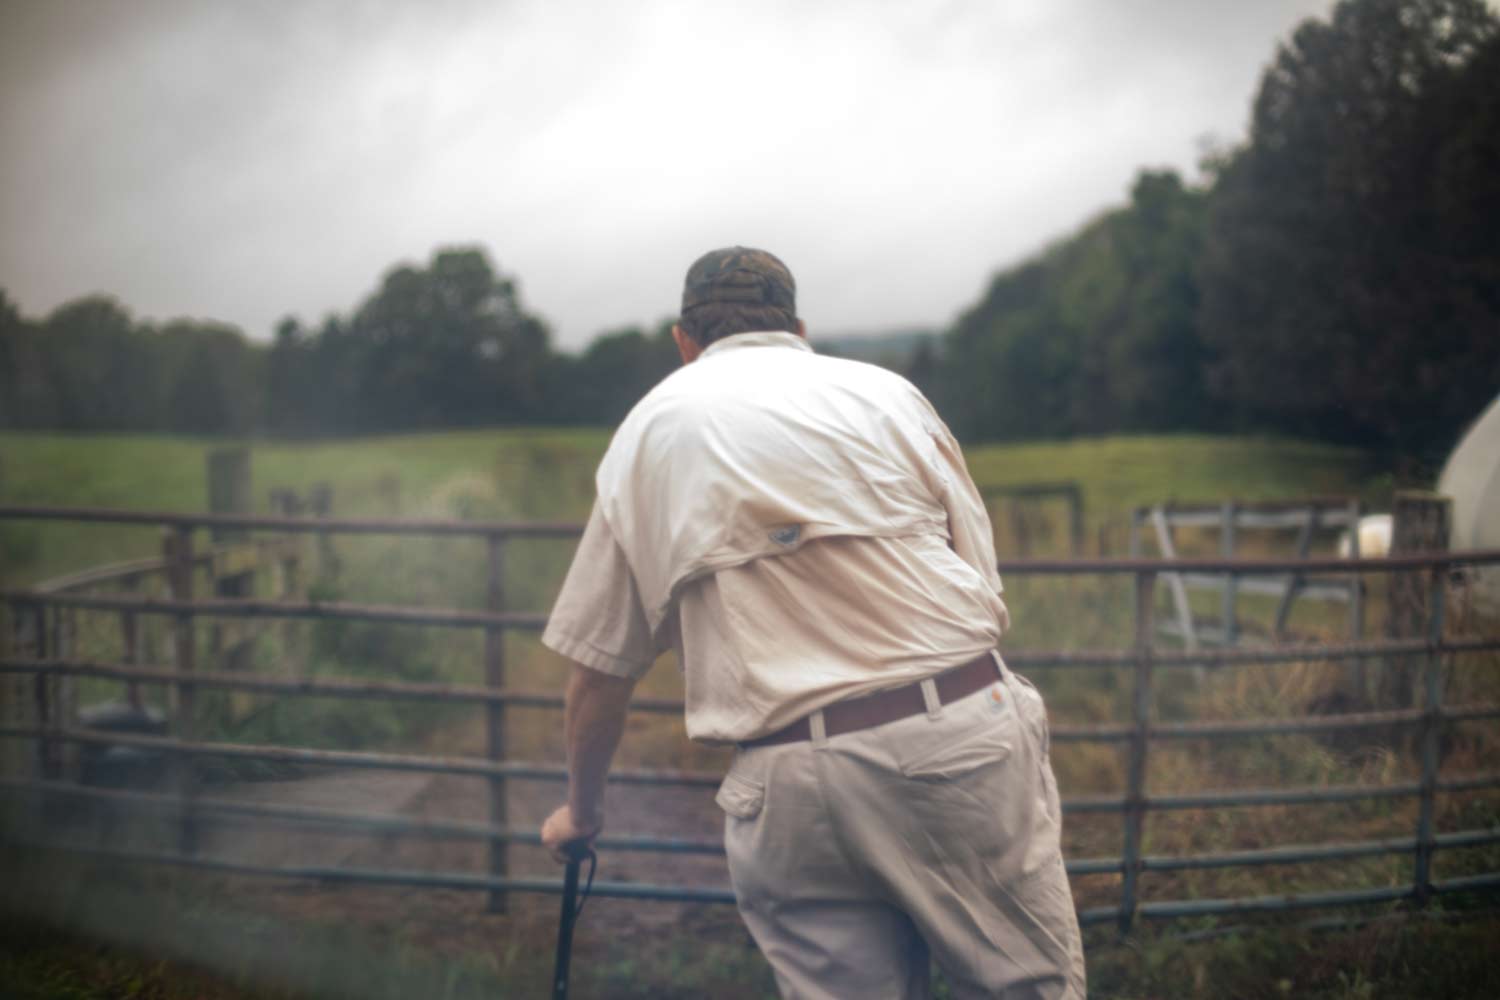 A photo taken from behind a man standing in front of a gate.